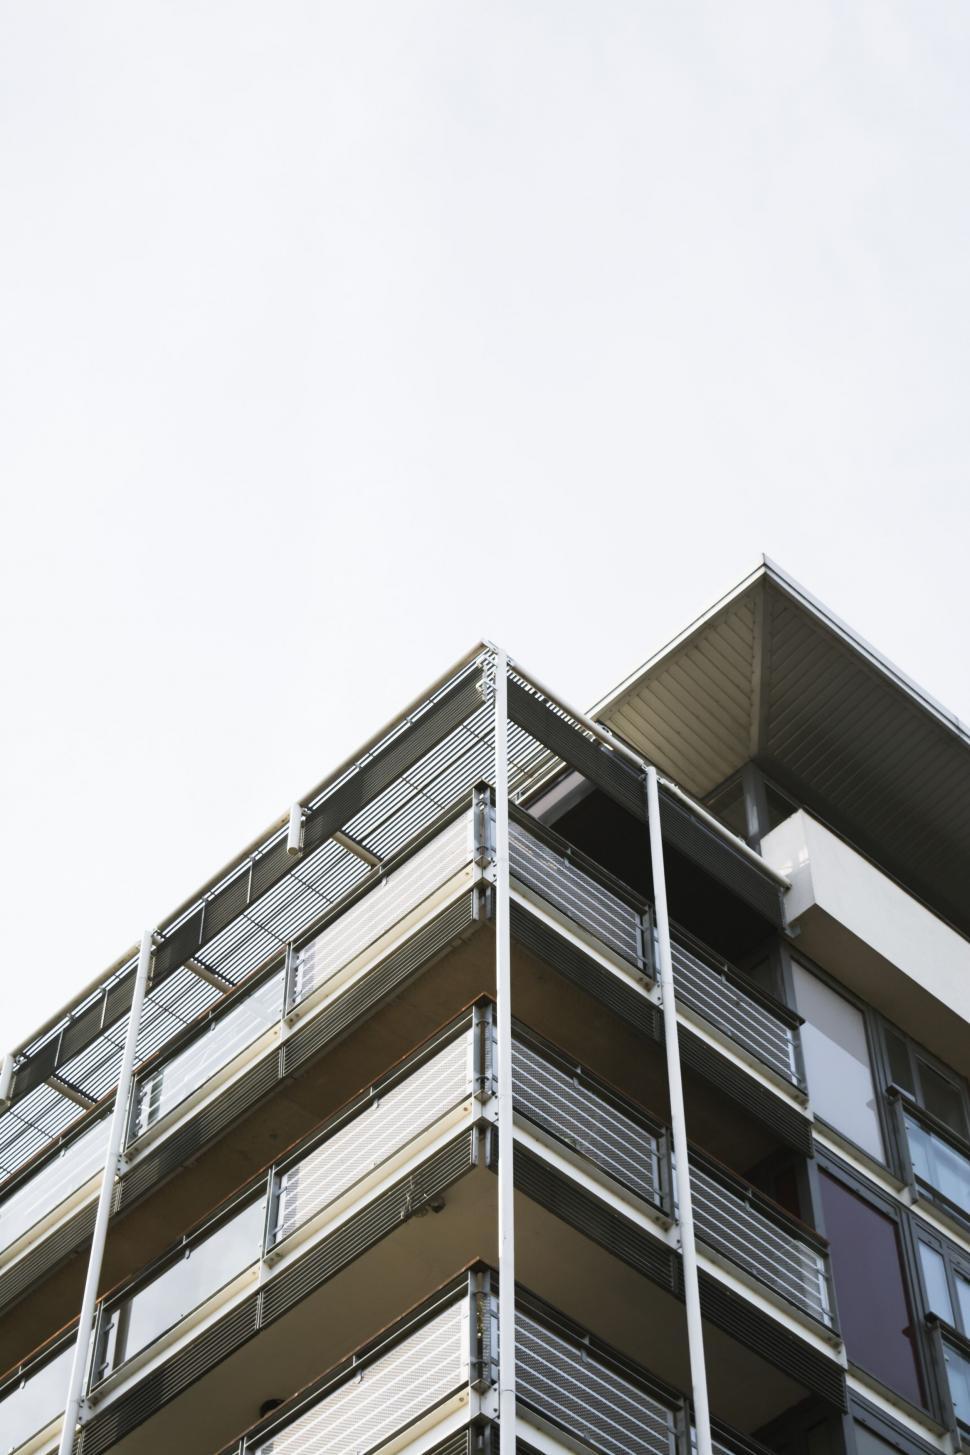 Free Image of Modern Tall Building With Balconies 